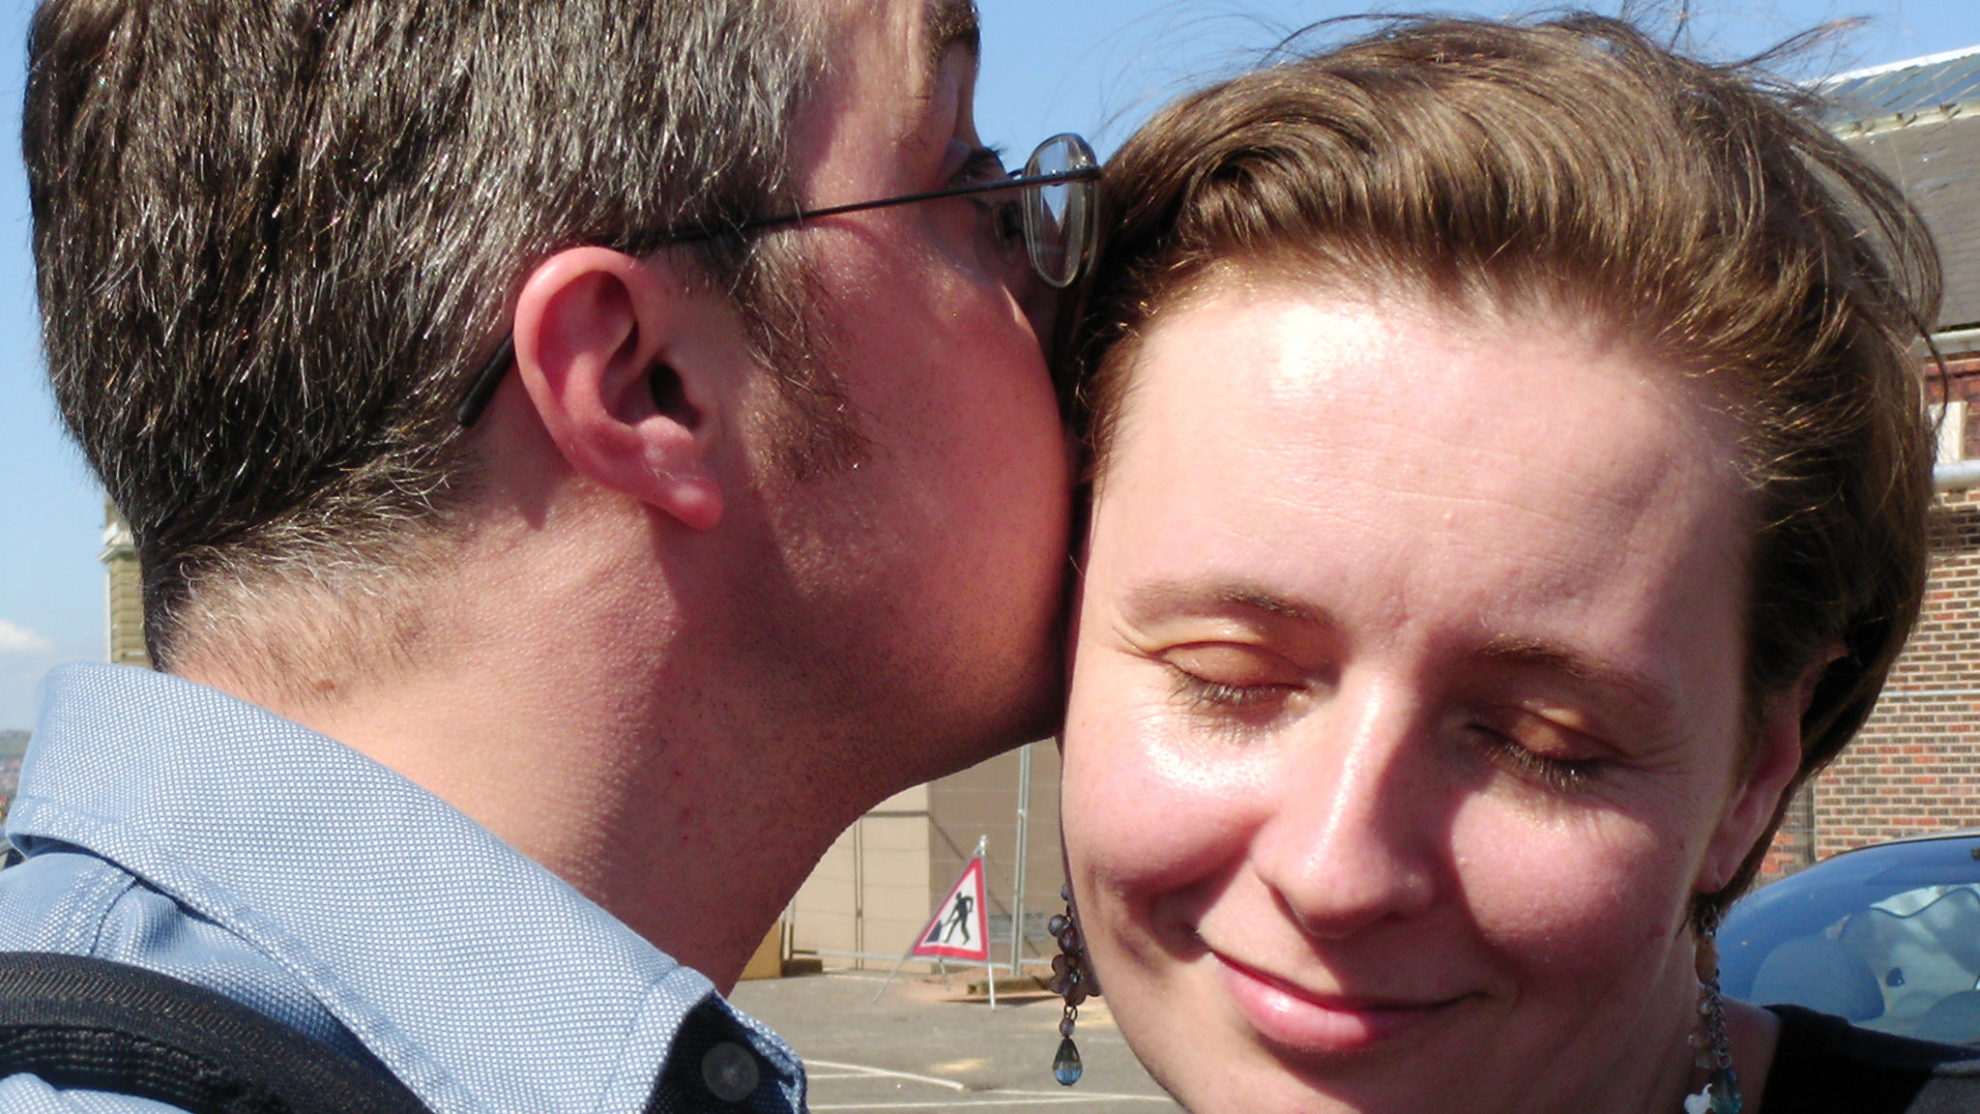 Close up image of two people embracing